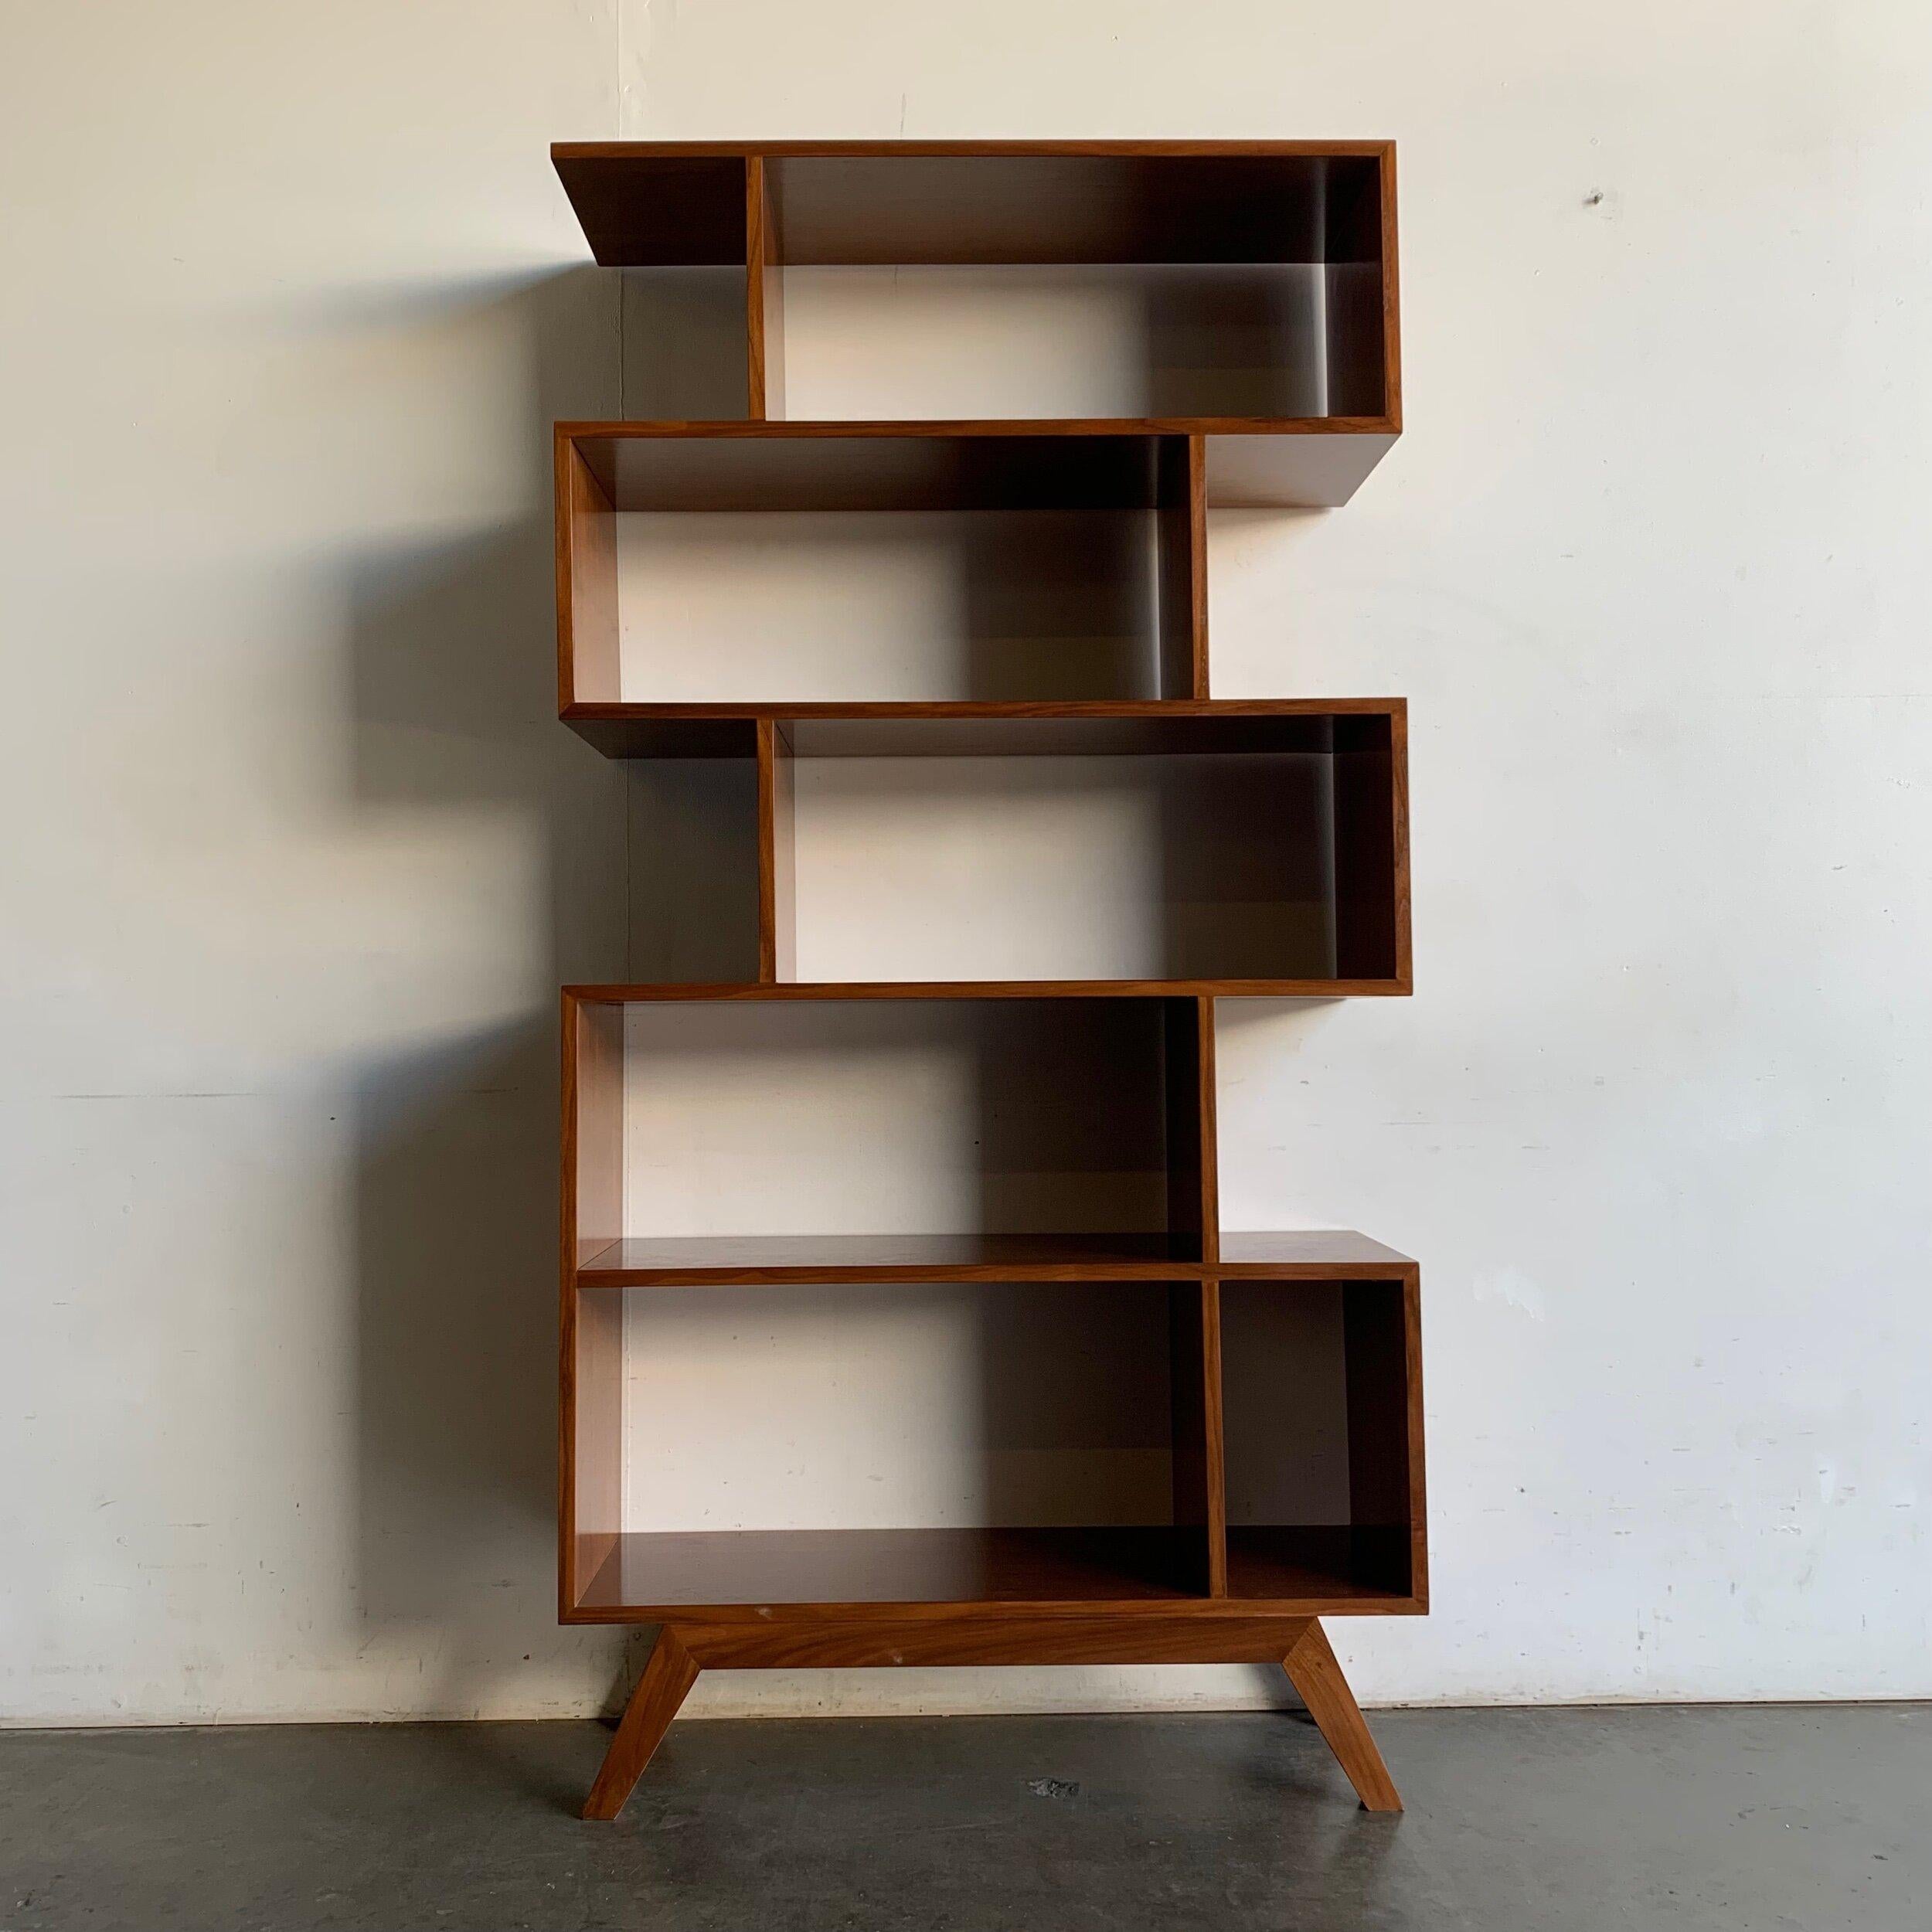 W36 D12.25 H70.25

Handcrafted solid and walnut veneer five tiered bookcase. Item is newly made here in house, and is ready for pick up or delivery. For custom dimensions (surcharge) inquire directly.

Lead time 6-8months